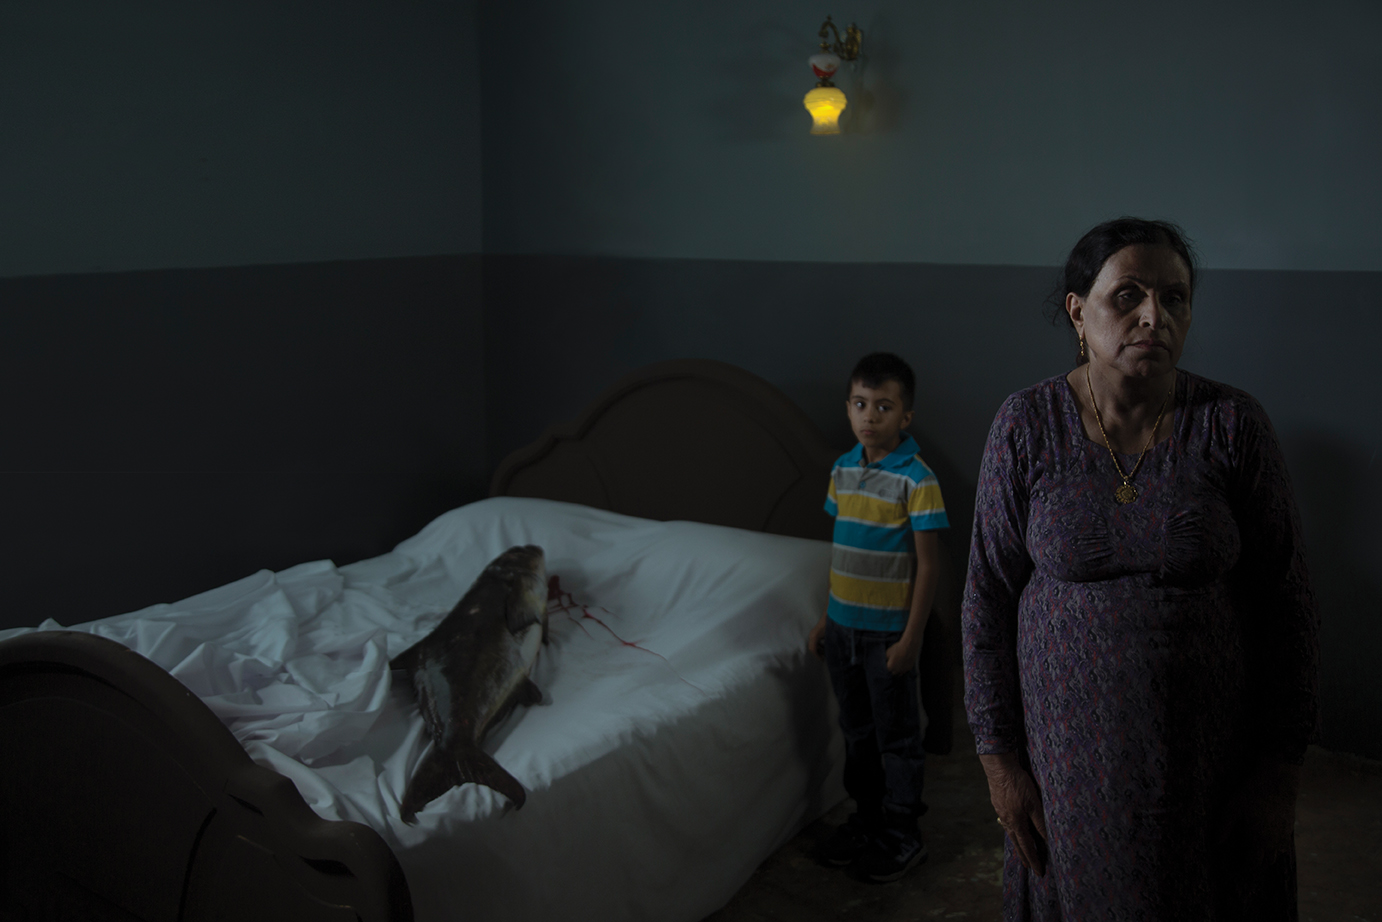 A woman and her son stand in a room, a big fish on the bed.